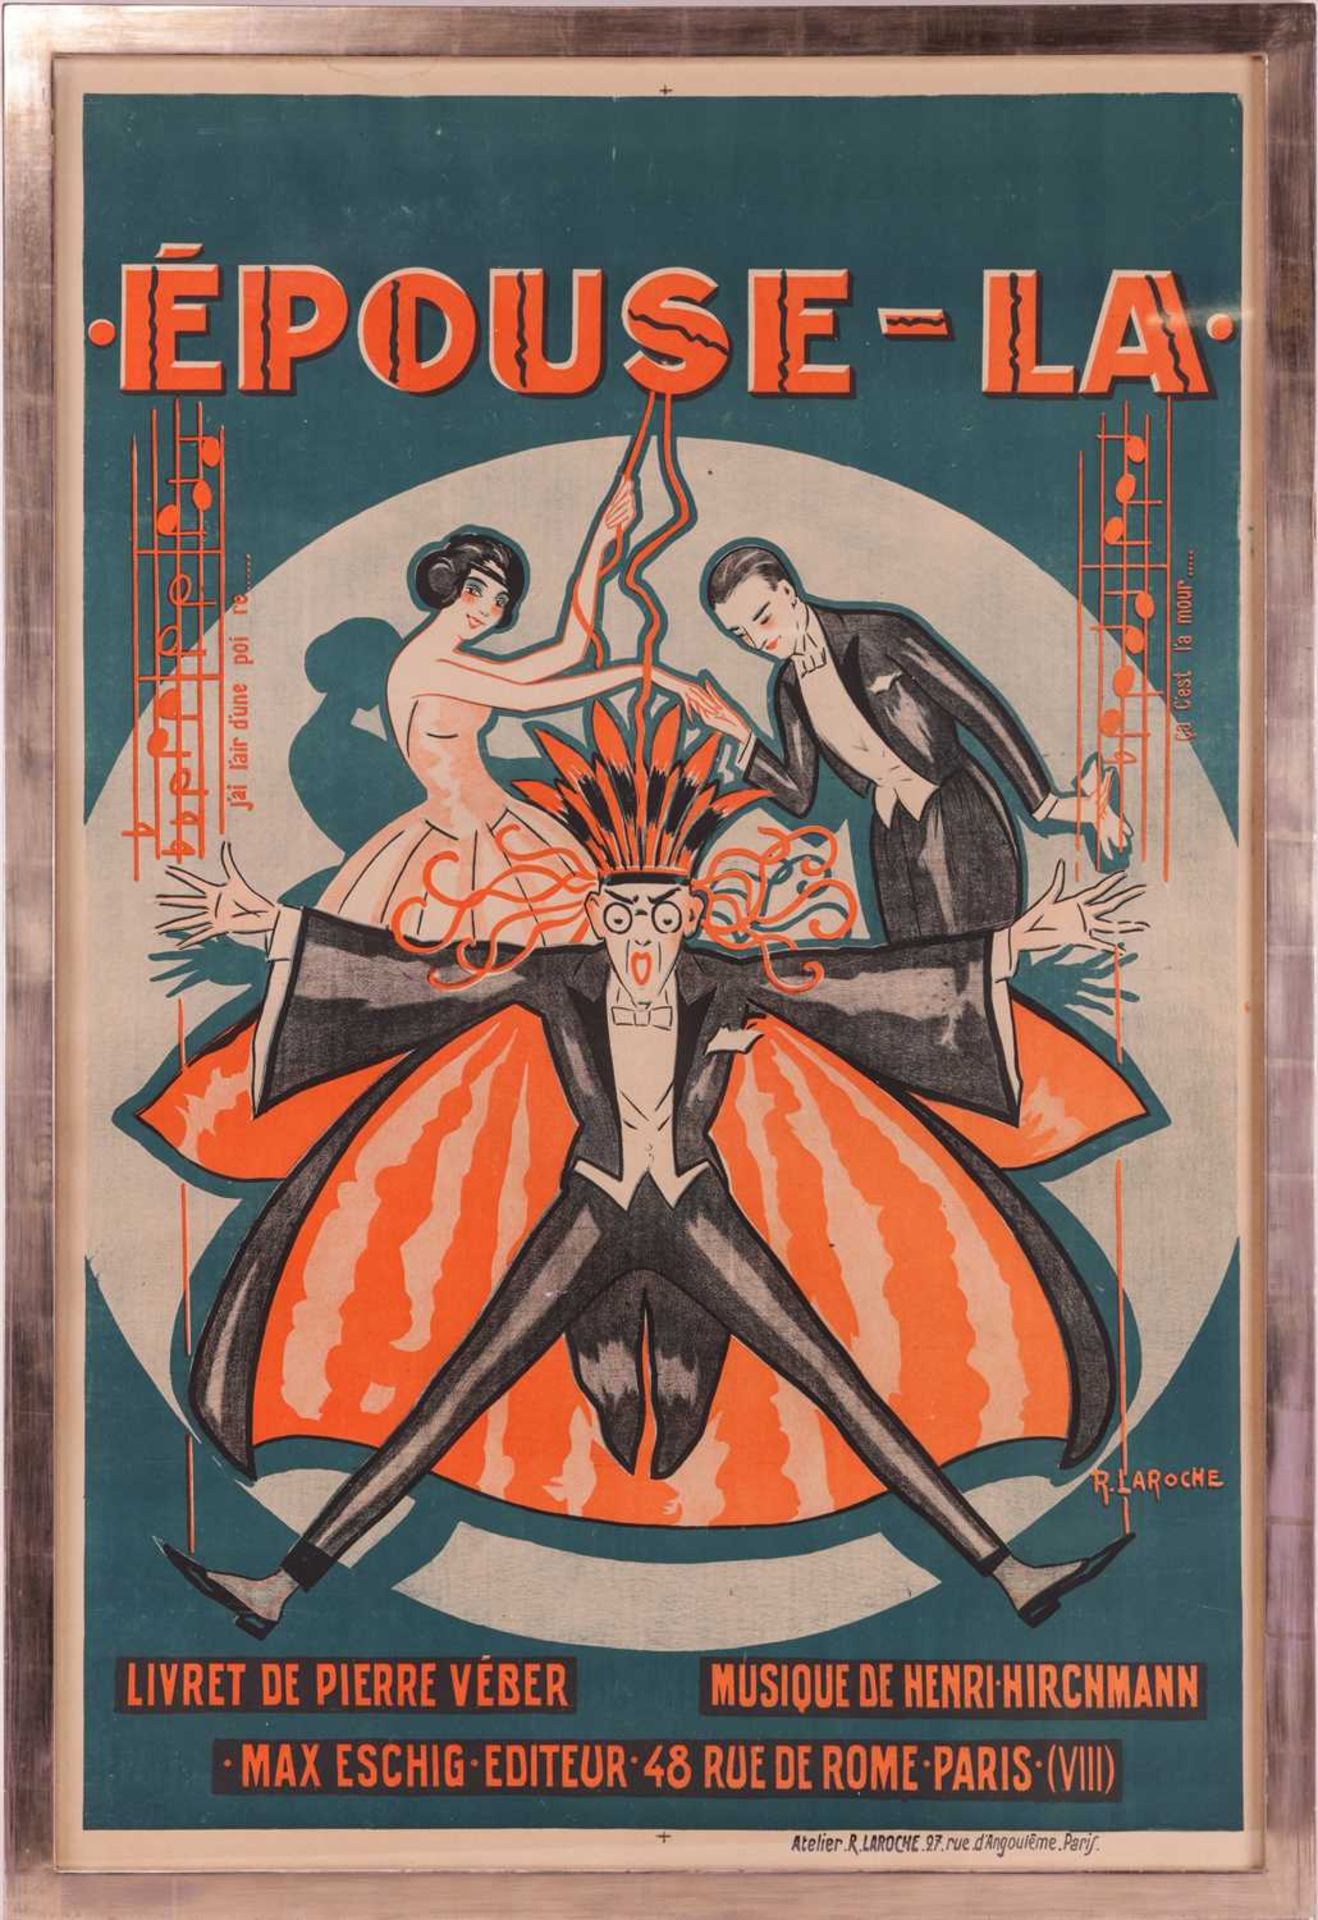 R Laroche (20th century), 'Épouse-La', a French art deco lithographic poster, 117 cm x 78 cm, framed - Image 9 of 9